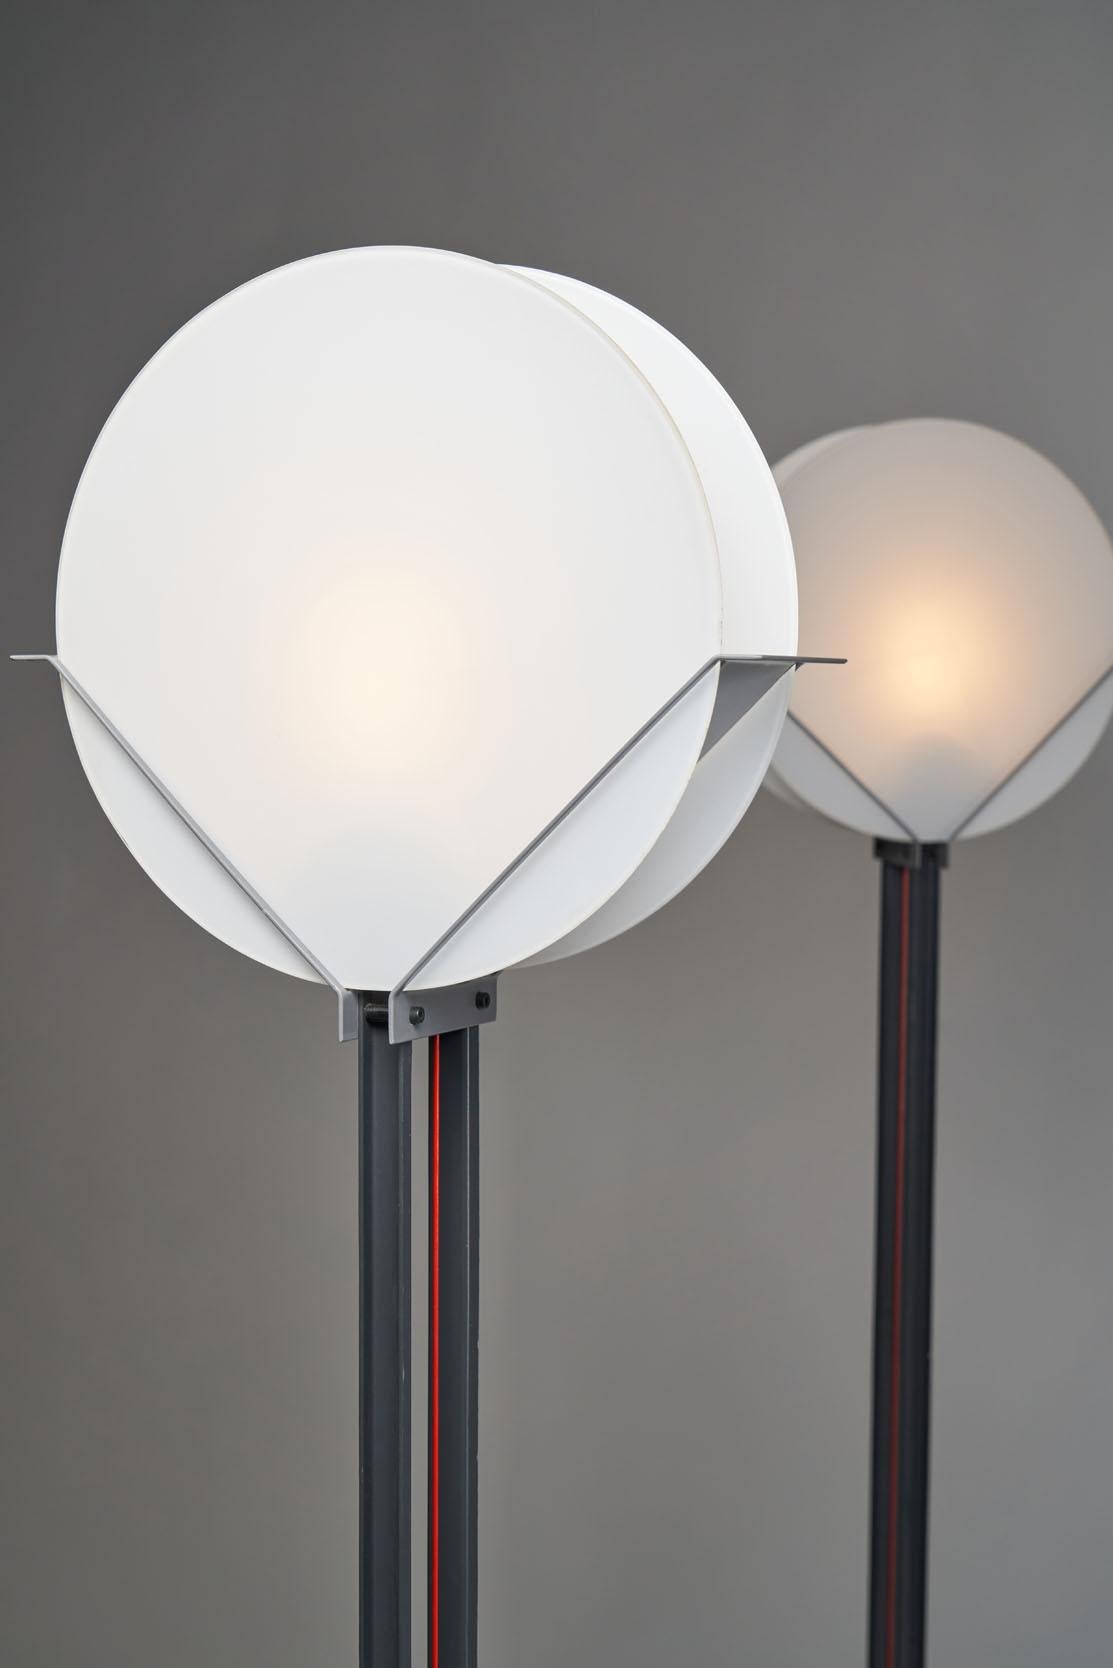 Pair of Limited Edition Menno Dieperink Floor Lamps, Netherlands, 1983 For Sale 2